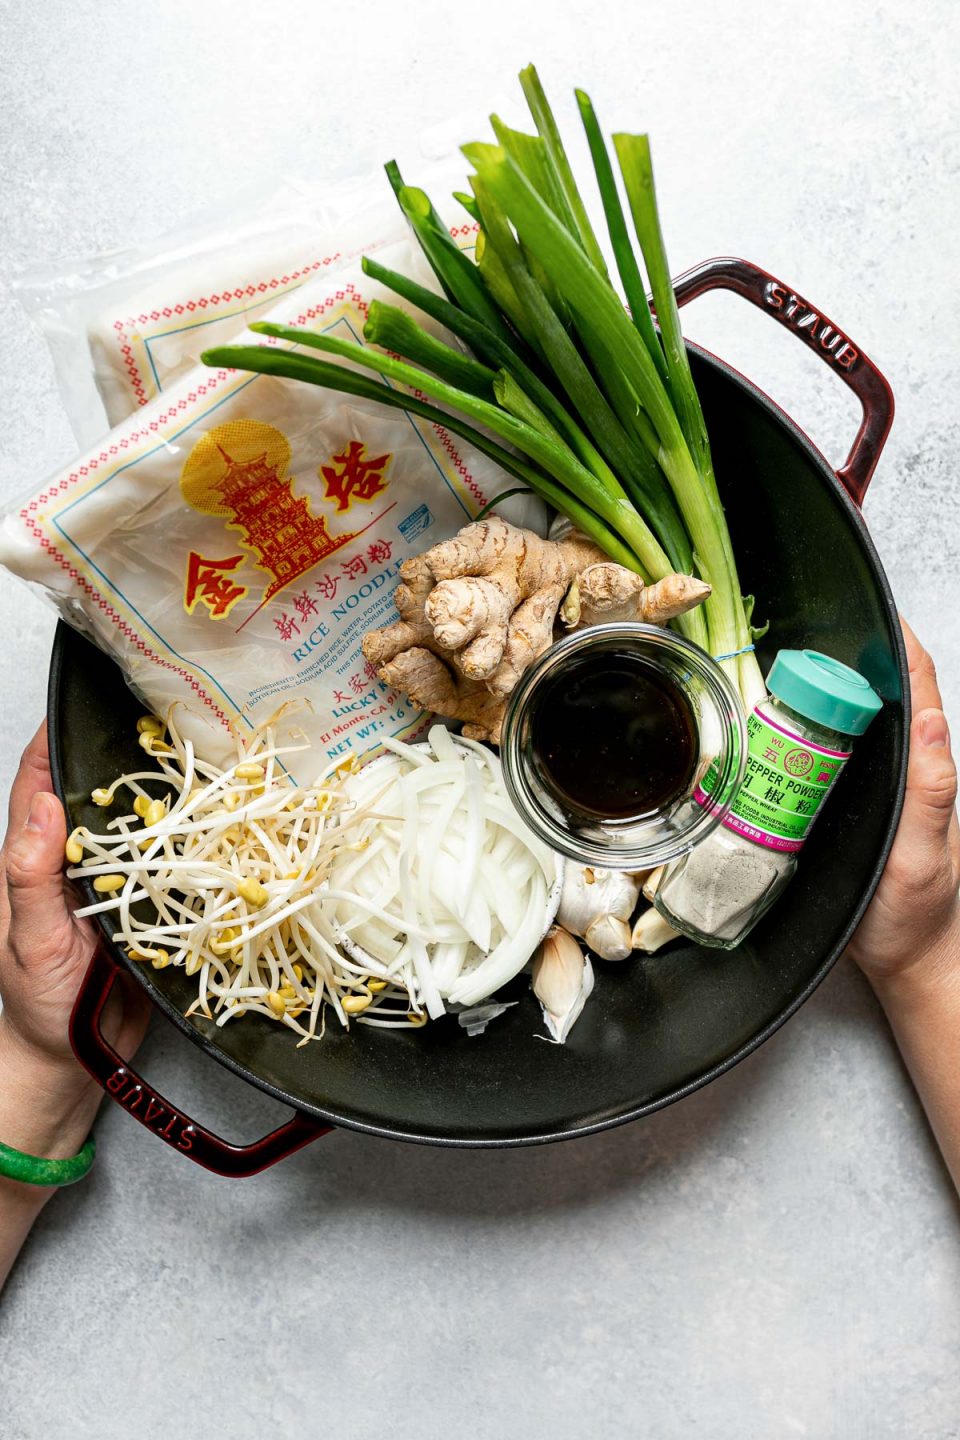 Hawaiian-style pork chow fun ingredients arranged in a grenadine-colored Staub cast iron wok sit on top of a light blue surface: green onions, yellow onions, fresh ginger, garlic, white pepper, fresh rice noodles, bean sprouts, and stir fry sauce that includes oyster sauce, sesame oil, soy sauce, and water. A woman's hands are placed around the wok.